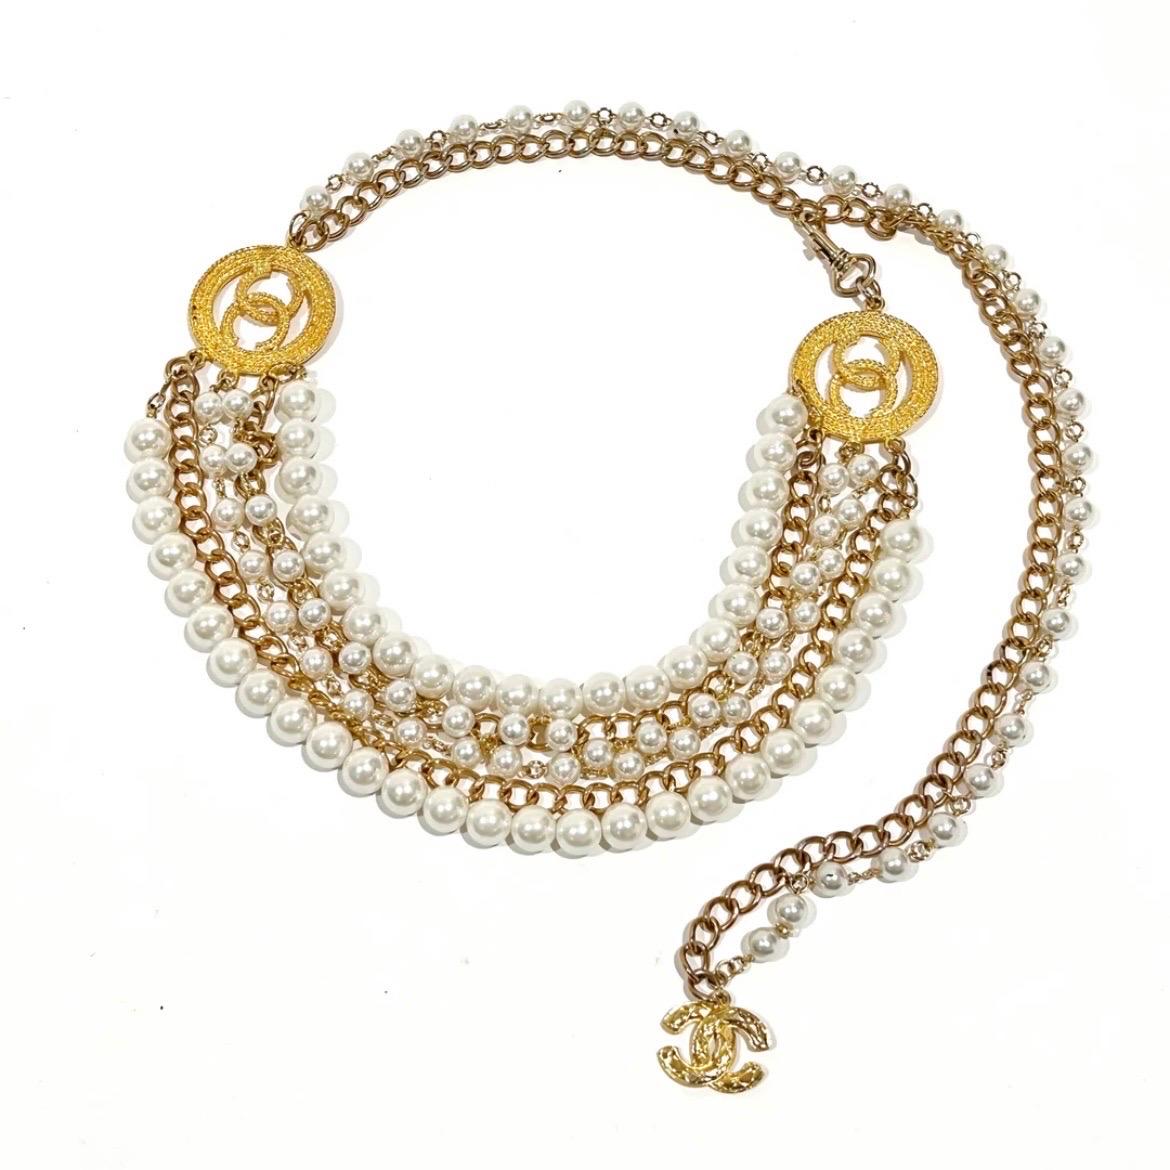 Multi-chain pearl belt by Chanel 
Circa 1980's
Made in France 
Gold-tone metal chain intertwined with strands of white pearl beads  
6 strands of chain/pearl drape detail 
Dual circular gold-tone logo pendants (on each side of drape detail)